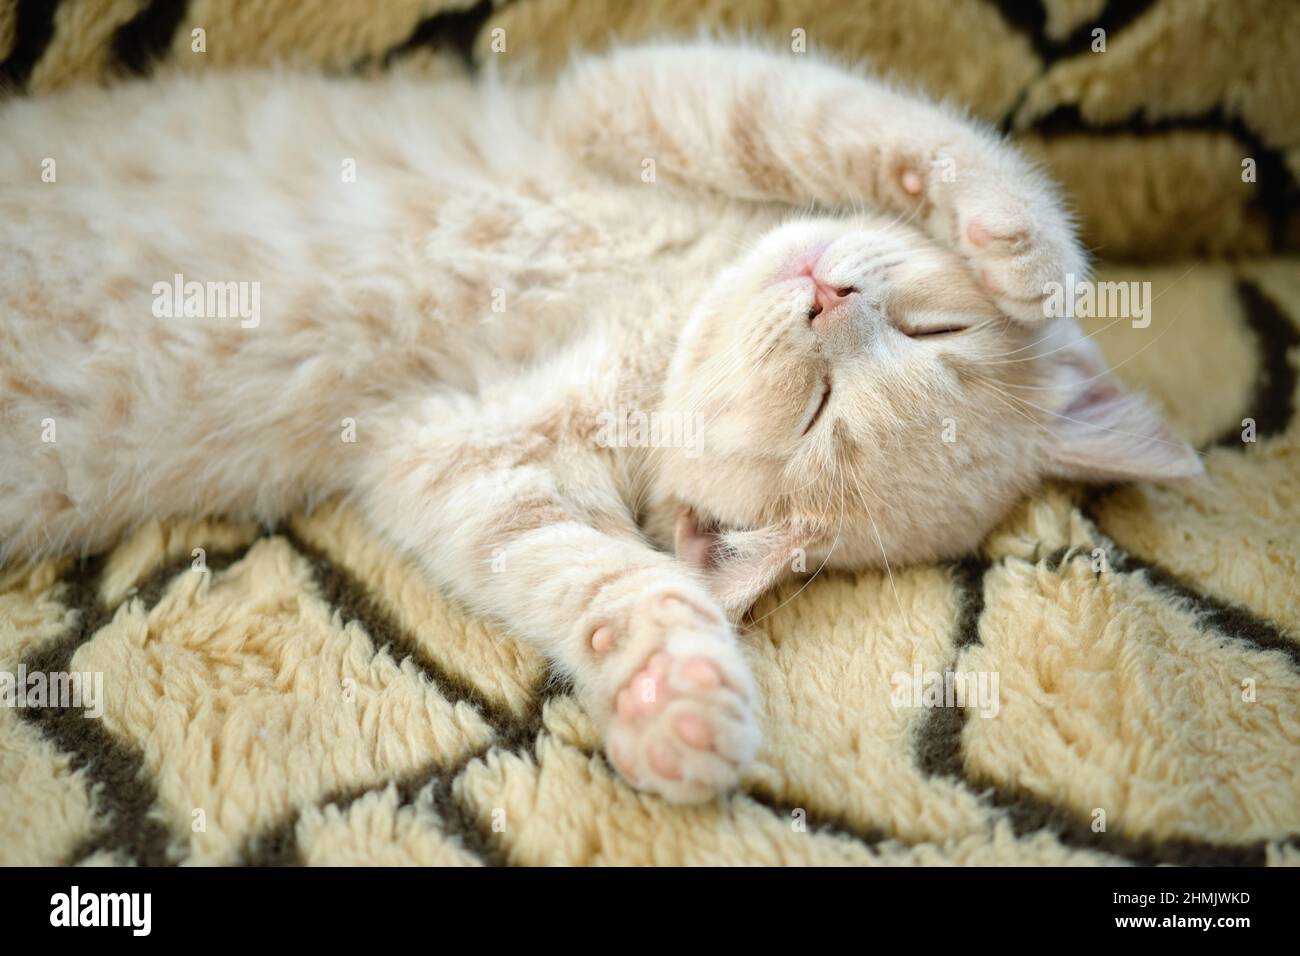 cute sleepy shorthair kitten shows its fluffy belly and pink paws to camera Stock Photo